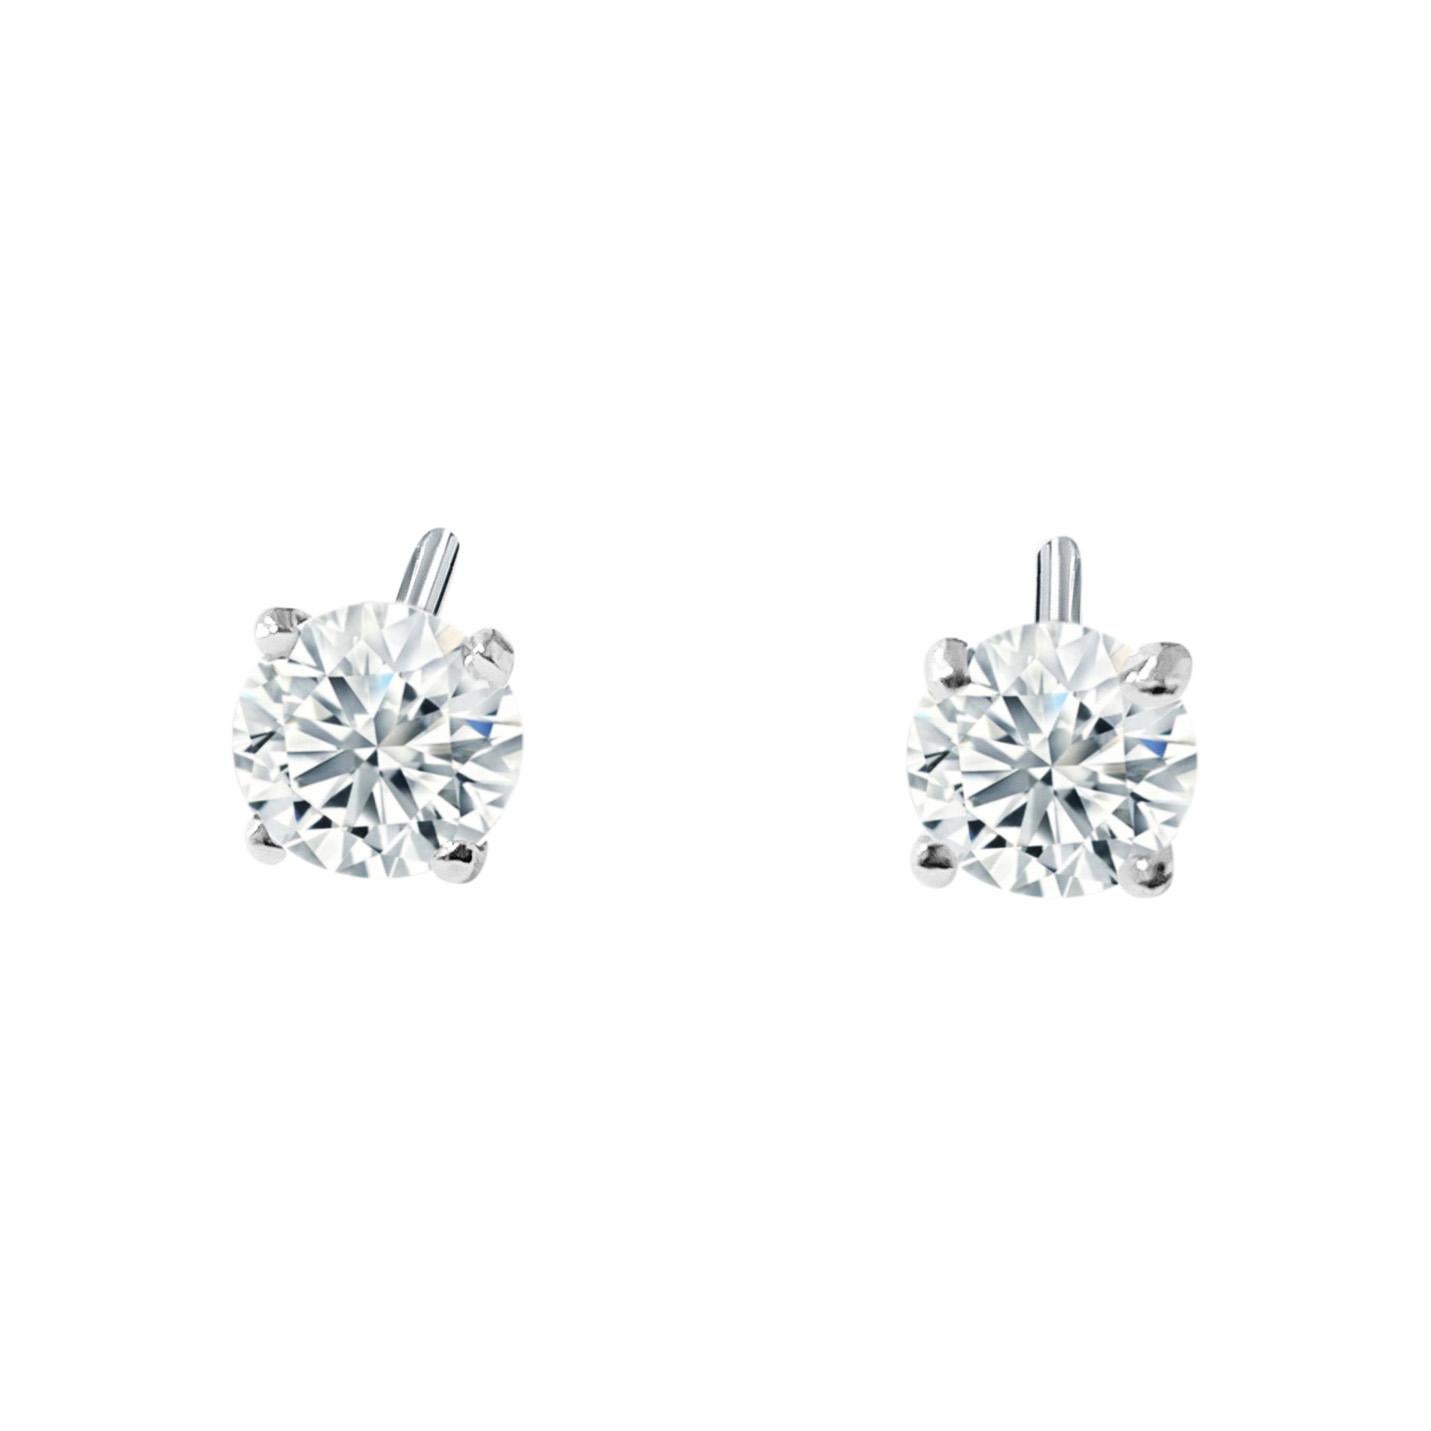 Metal: 14k white gold

Diamonds: 0.50 cwt. 
I1-I2 clarity. G-H color.
Round brilliant cut. 
100% natural earth mined diamonds. 

Classic 4 prong diamond studs. Pushback stud earrings. Beautiful unisex fine jewelry. 